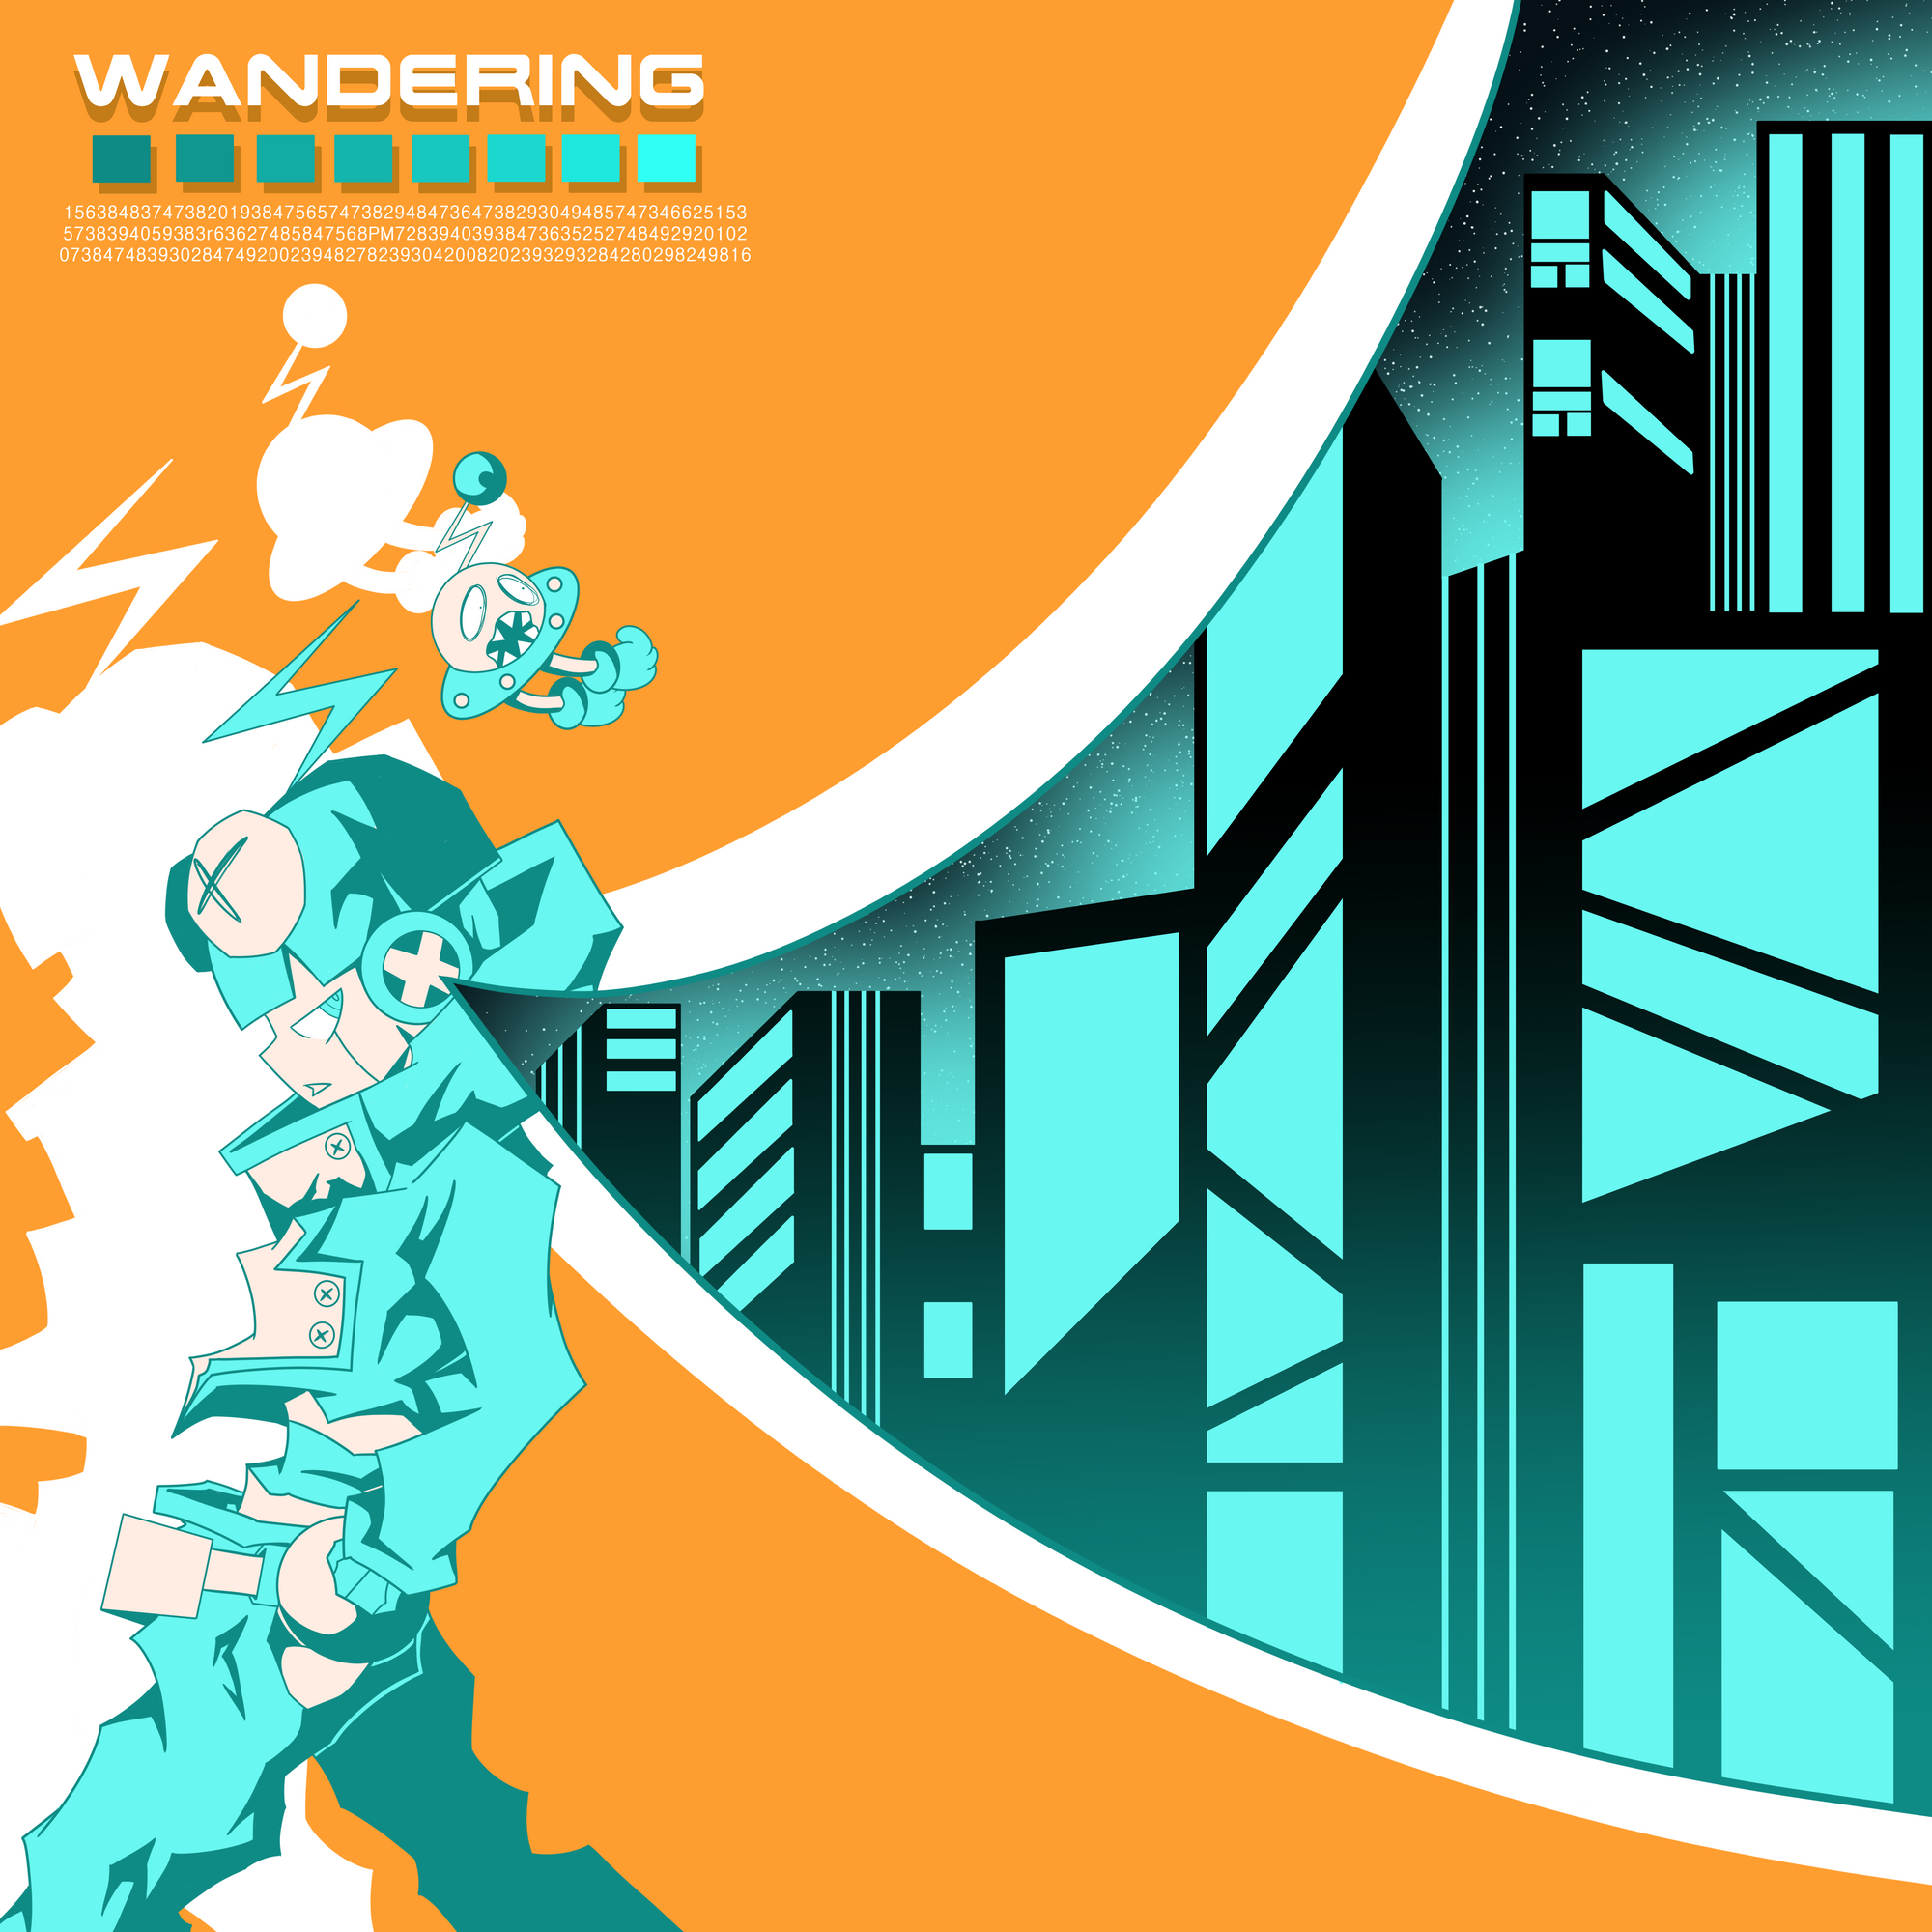 Wandering cover